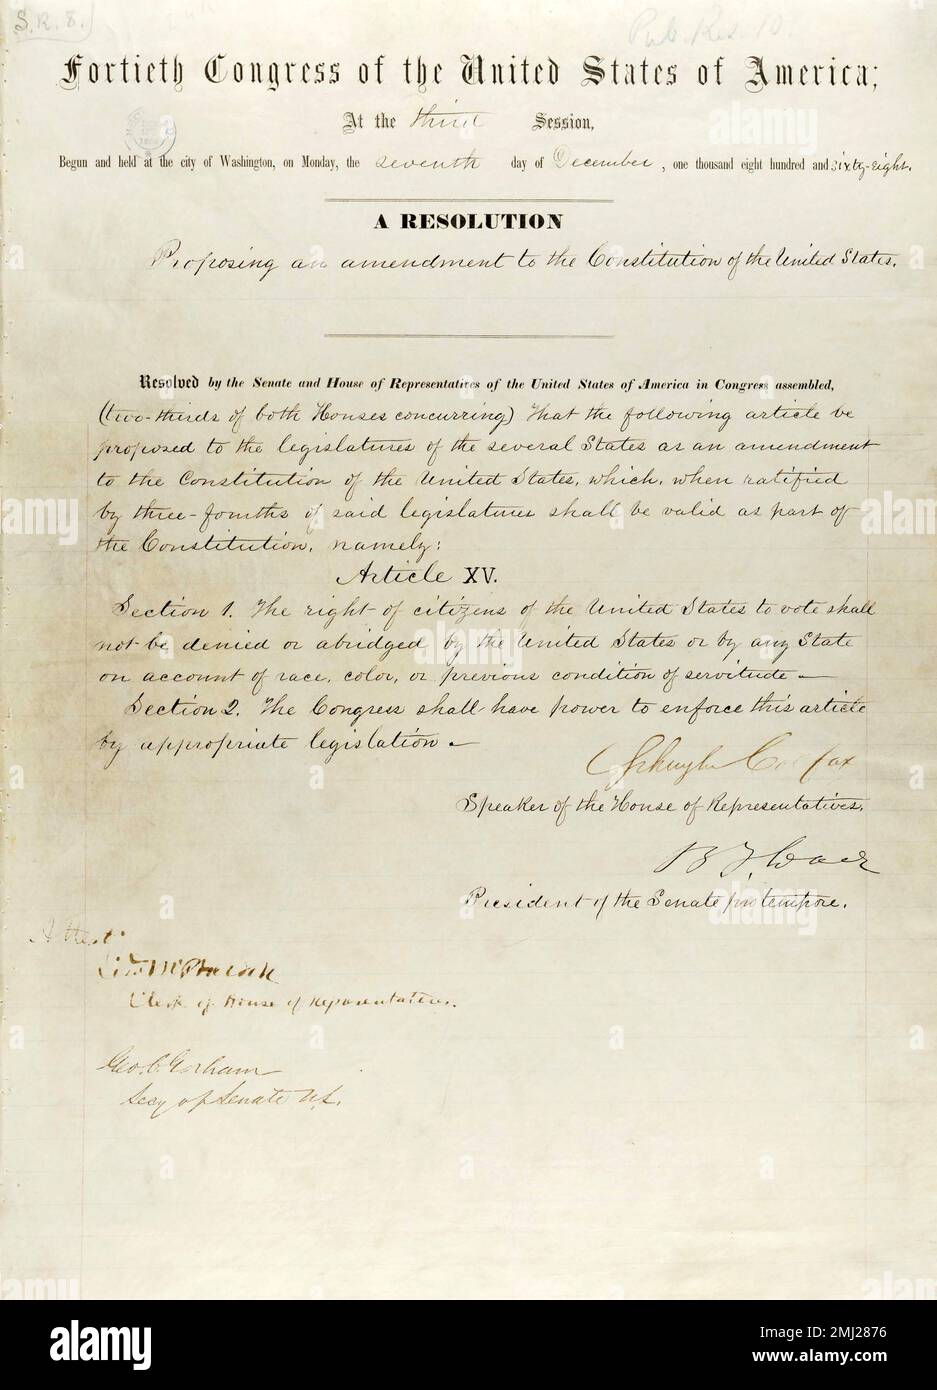 Fifteenth Amendment to the United States Constitution, 1870. The 15th Amendment (Amendment XV) to the United States Constitution prohibits the federal government and each state from denying or abridging a citizen's right to vote 'on account of race, color, or previous condition of servitude.' Stock Photo